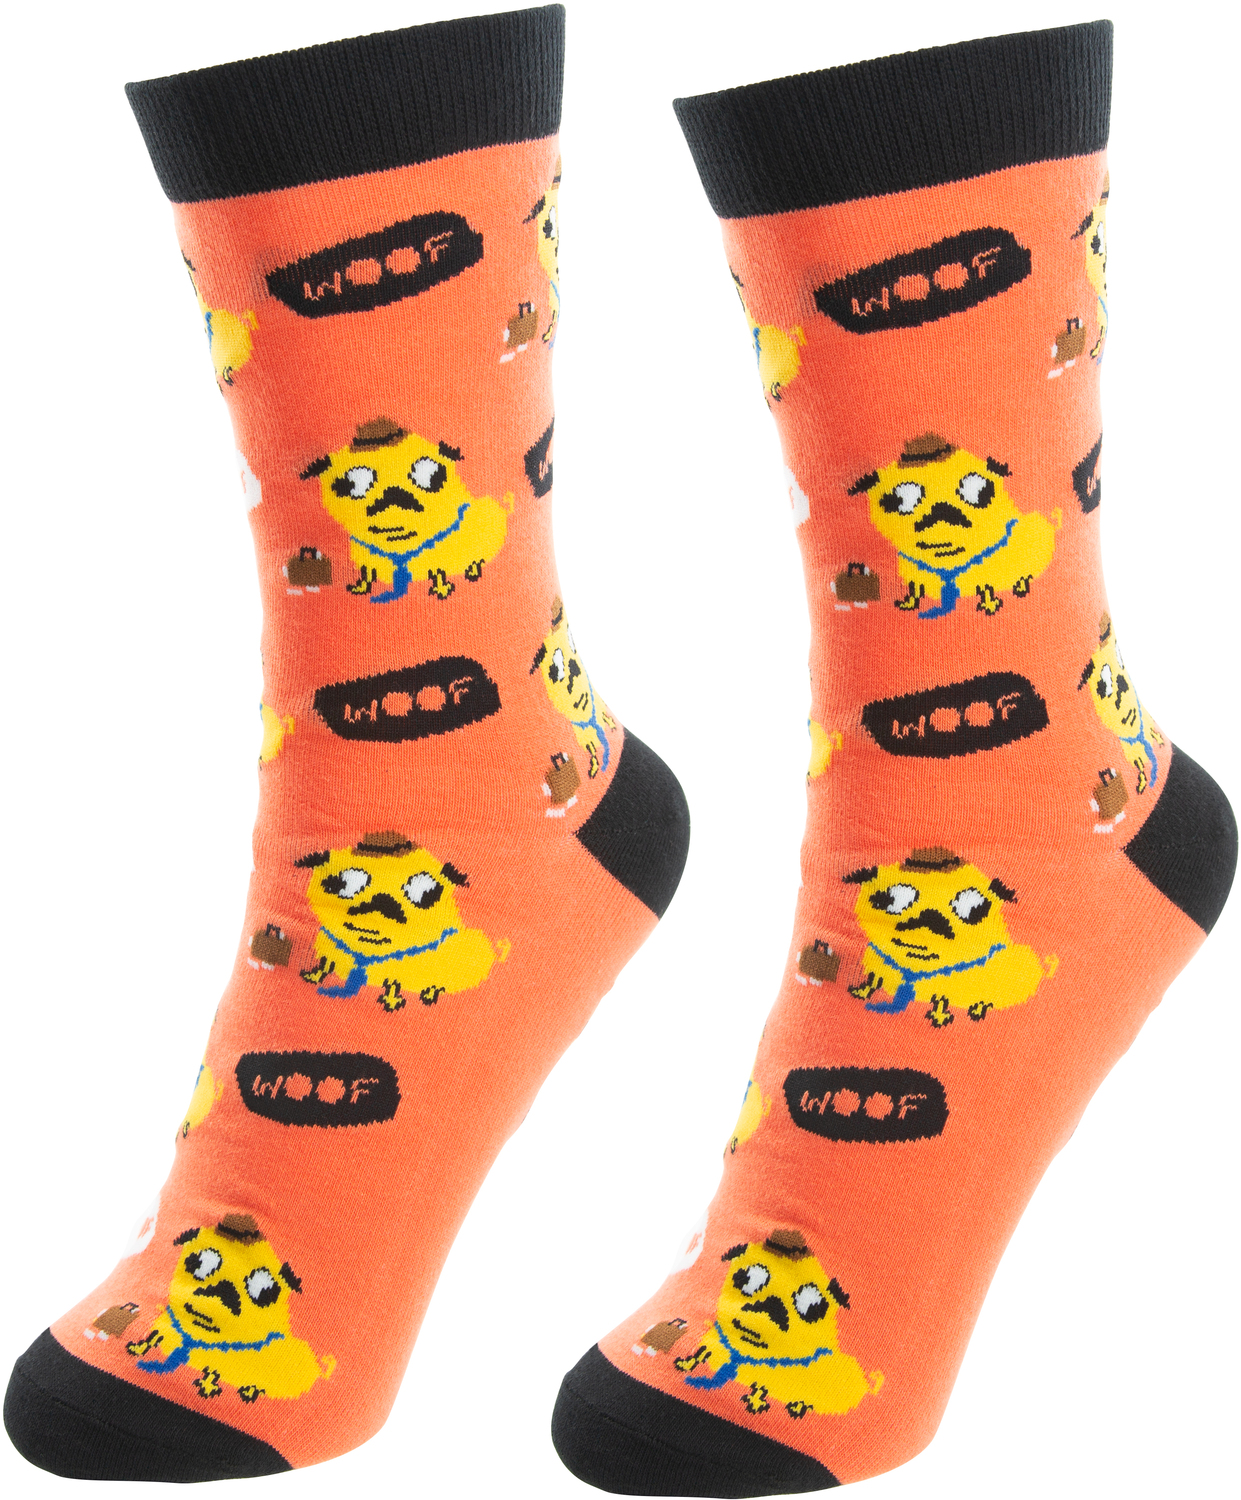 Ruff Day by Fugly Friends - Ruff Day - S/M Unisex Cotton Blend Sock